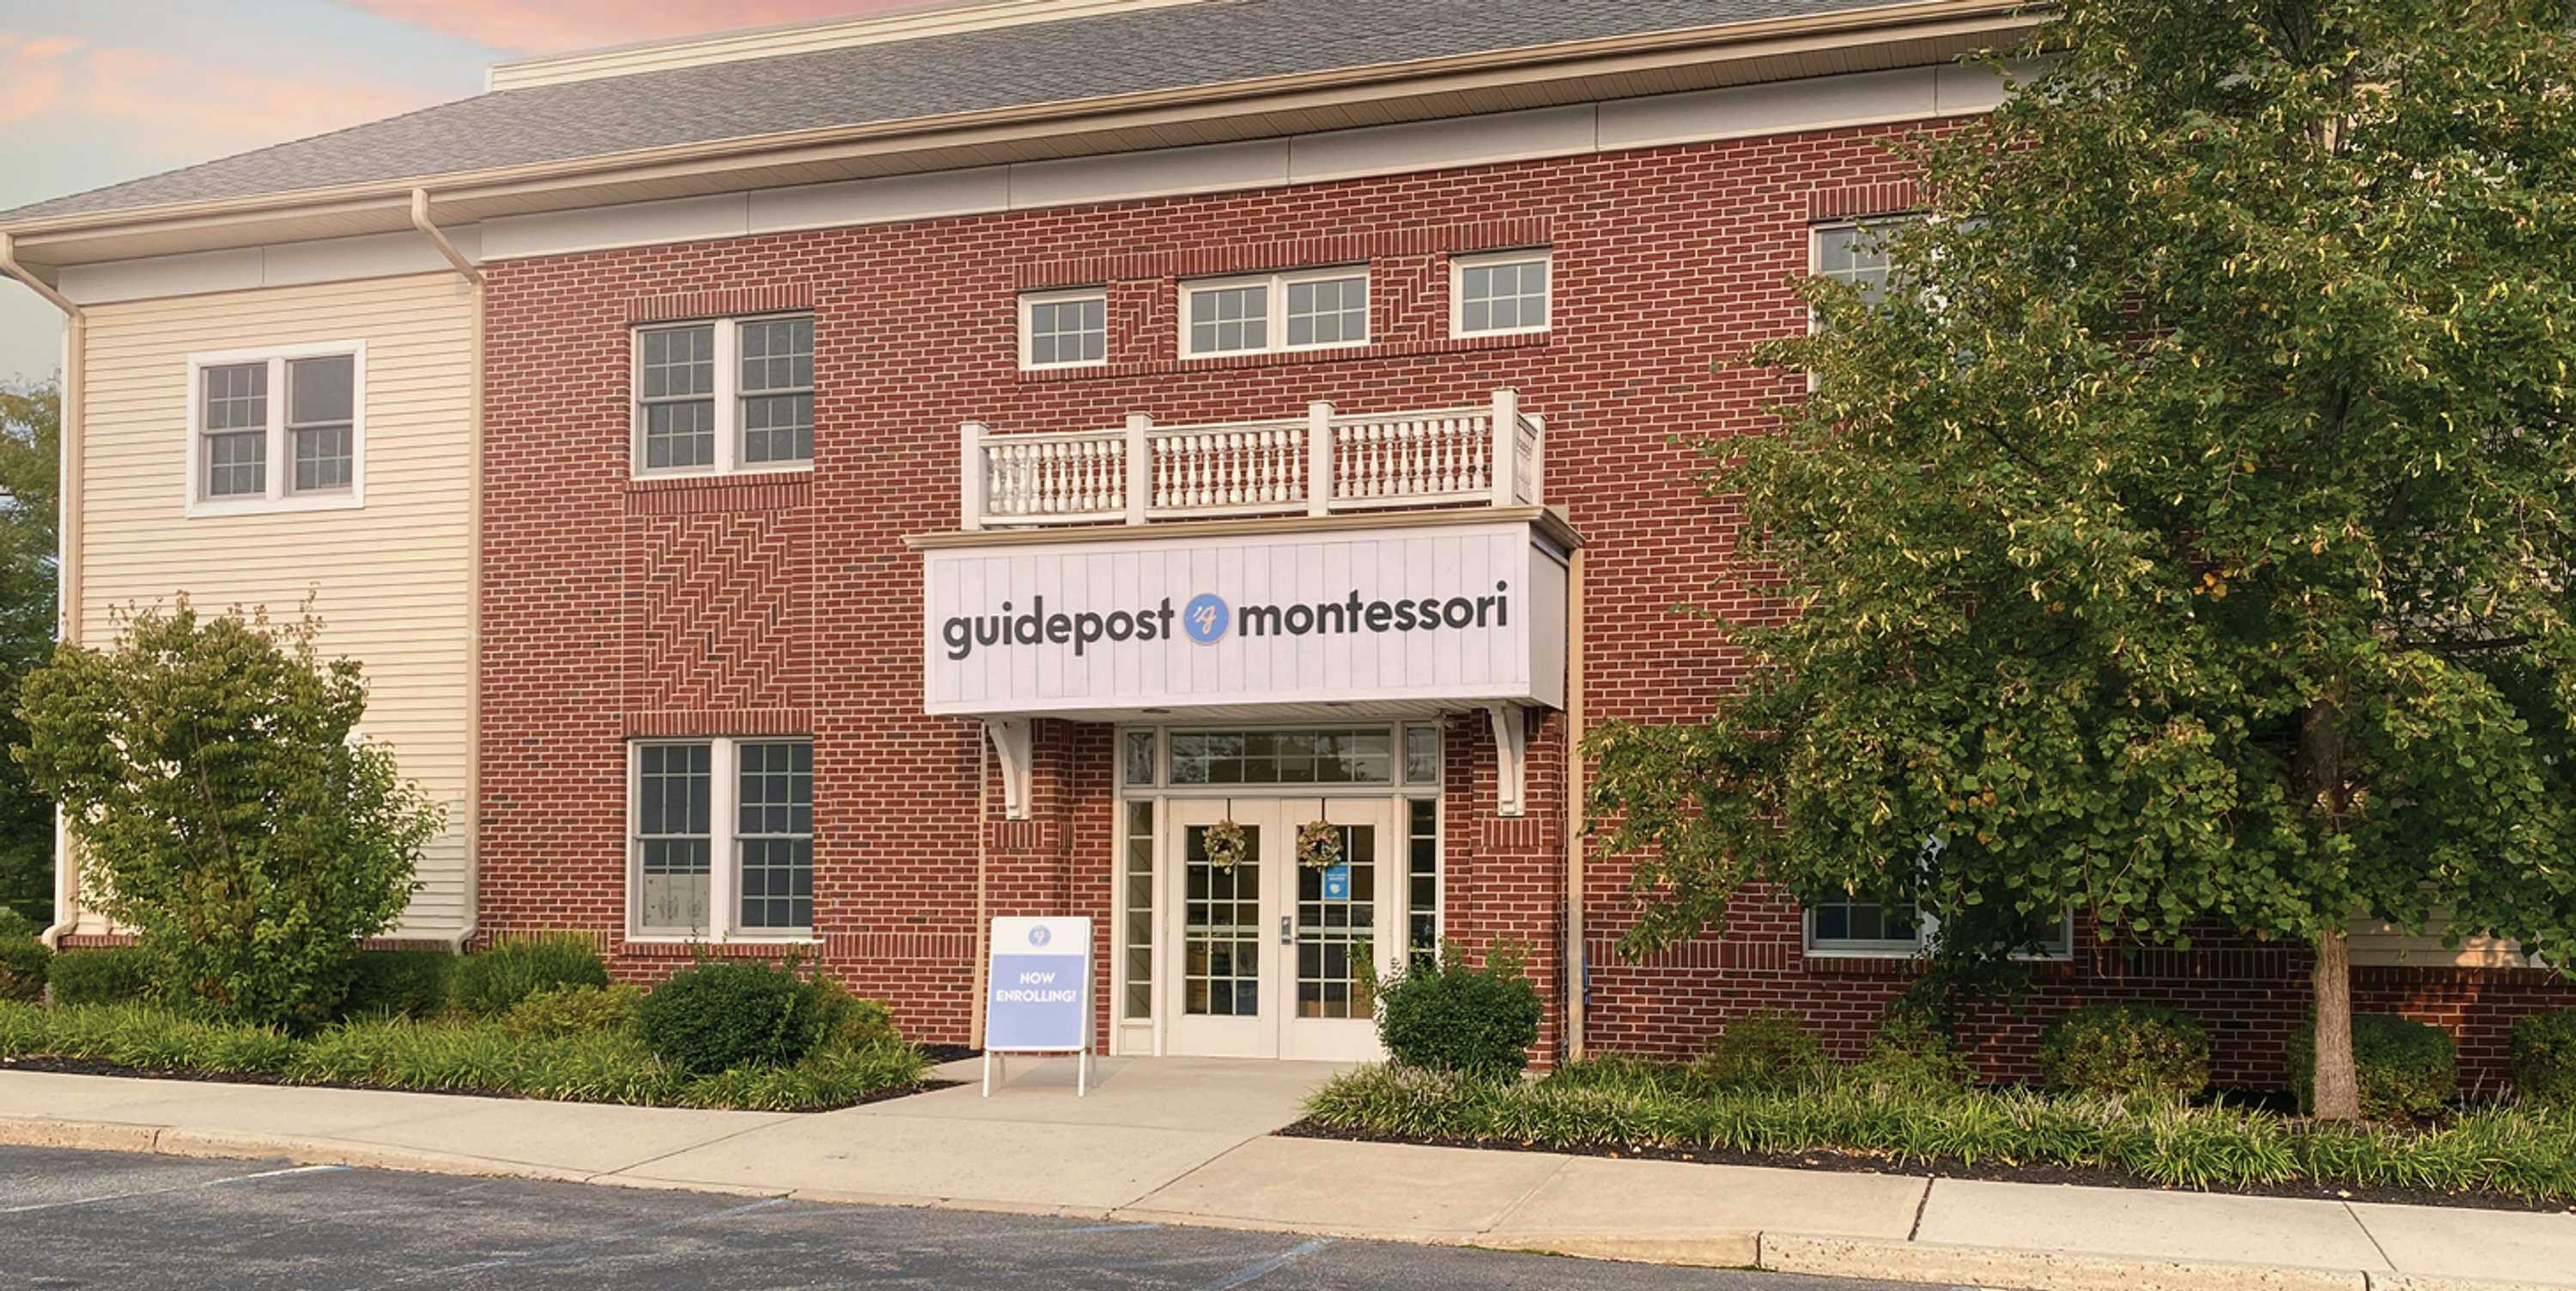 View of Guidepost Montessori at Somerset from the parking lot that shows the two story building with a brick exterior. A fake balcony rests above the entrance door and a branded Guidepost Montessori sign hangs form it. Shrubs and bushes line the building.